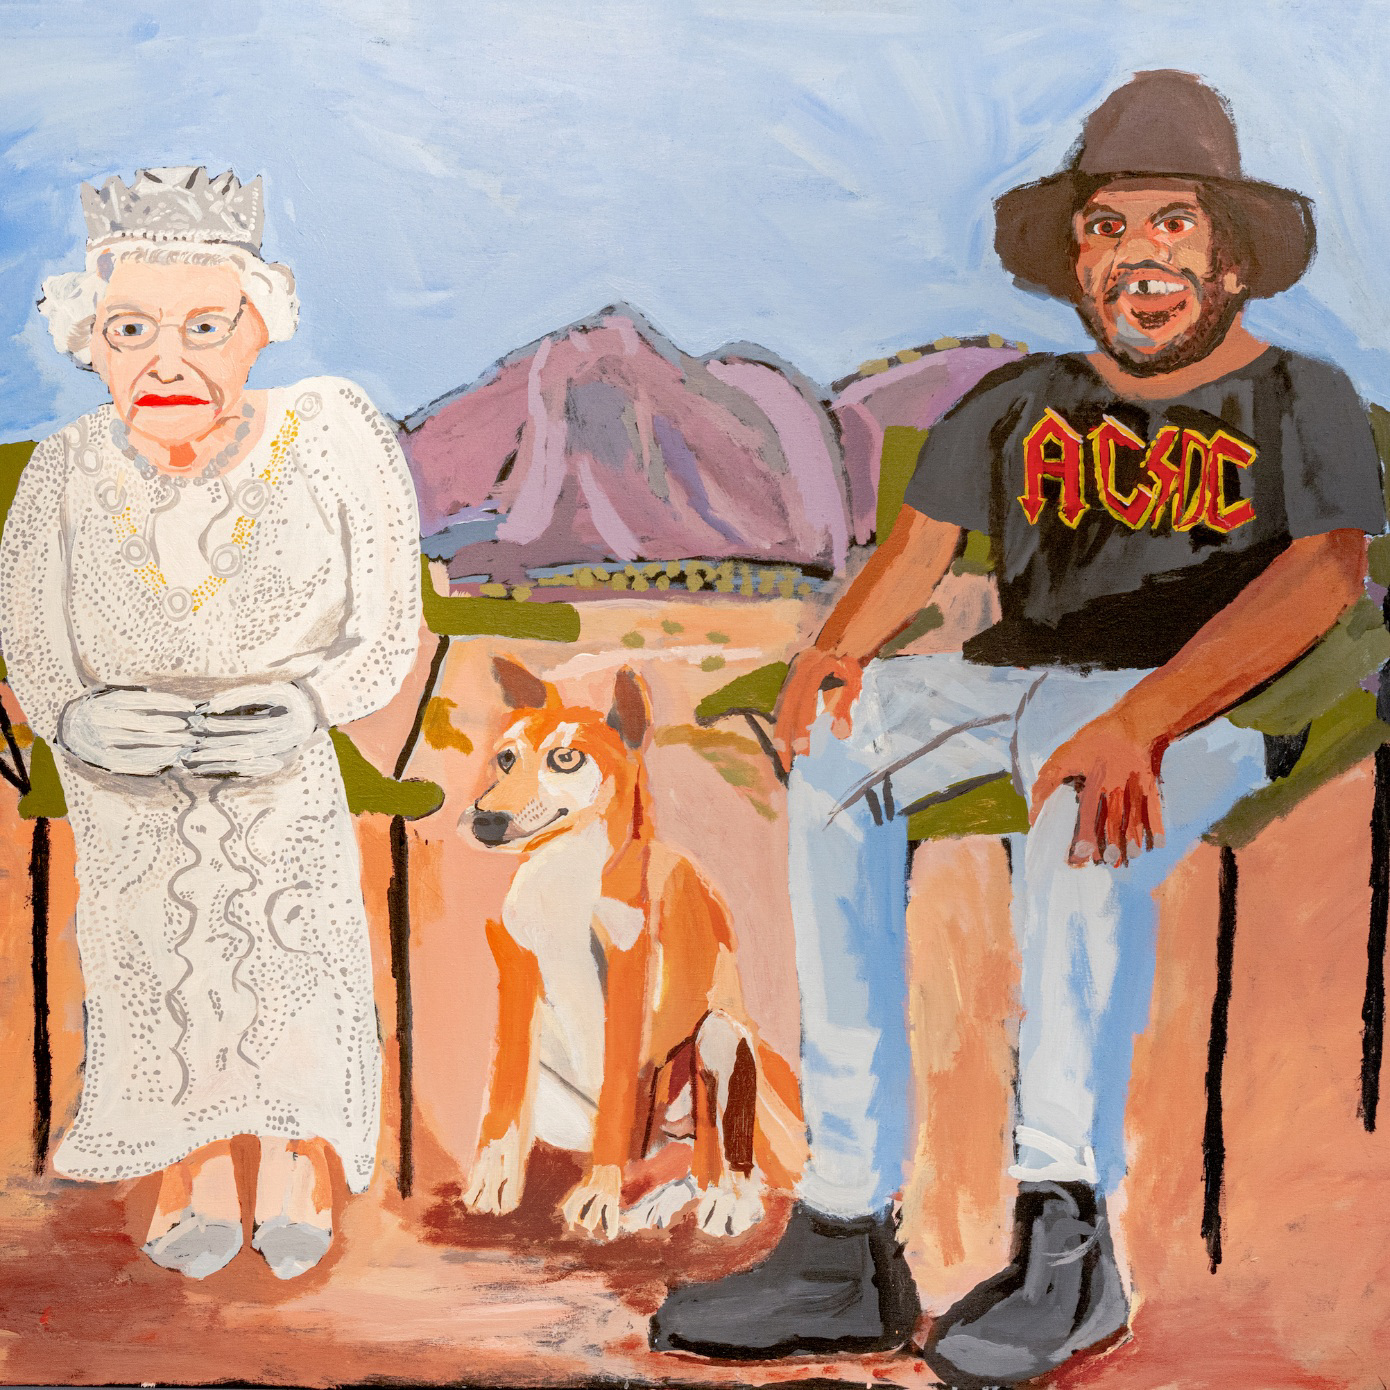 painting of Queen Elizabeth II in formal attire next to indigenous man wearing AC/DC tshirt in jeans against mountain background